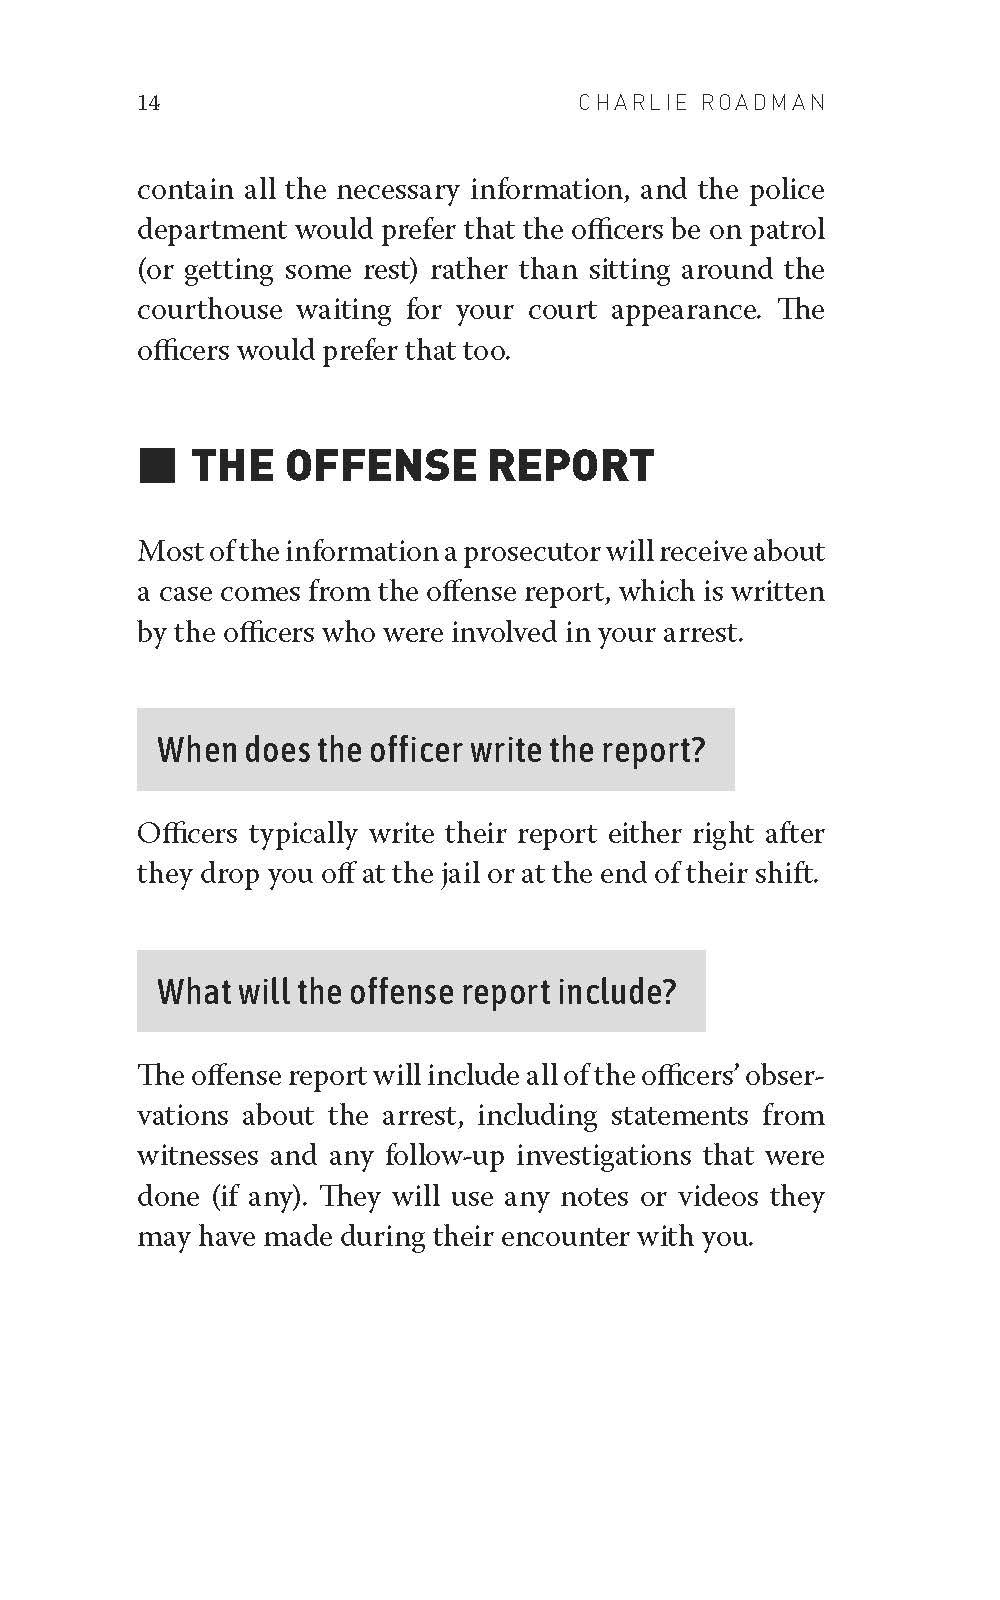 Sample_of_Defendant_s_Guide_to_Defense_Page_17.jpg